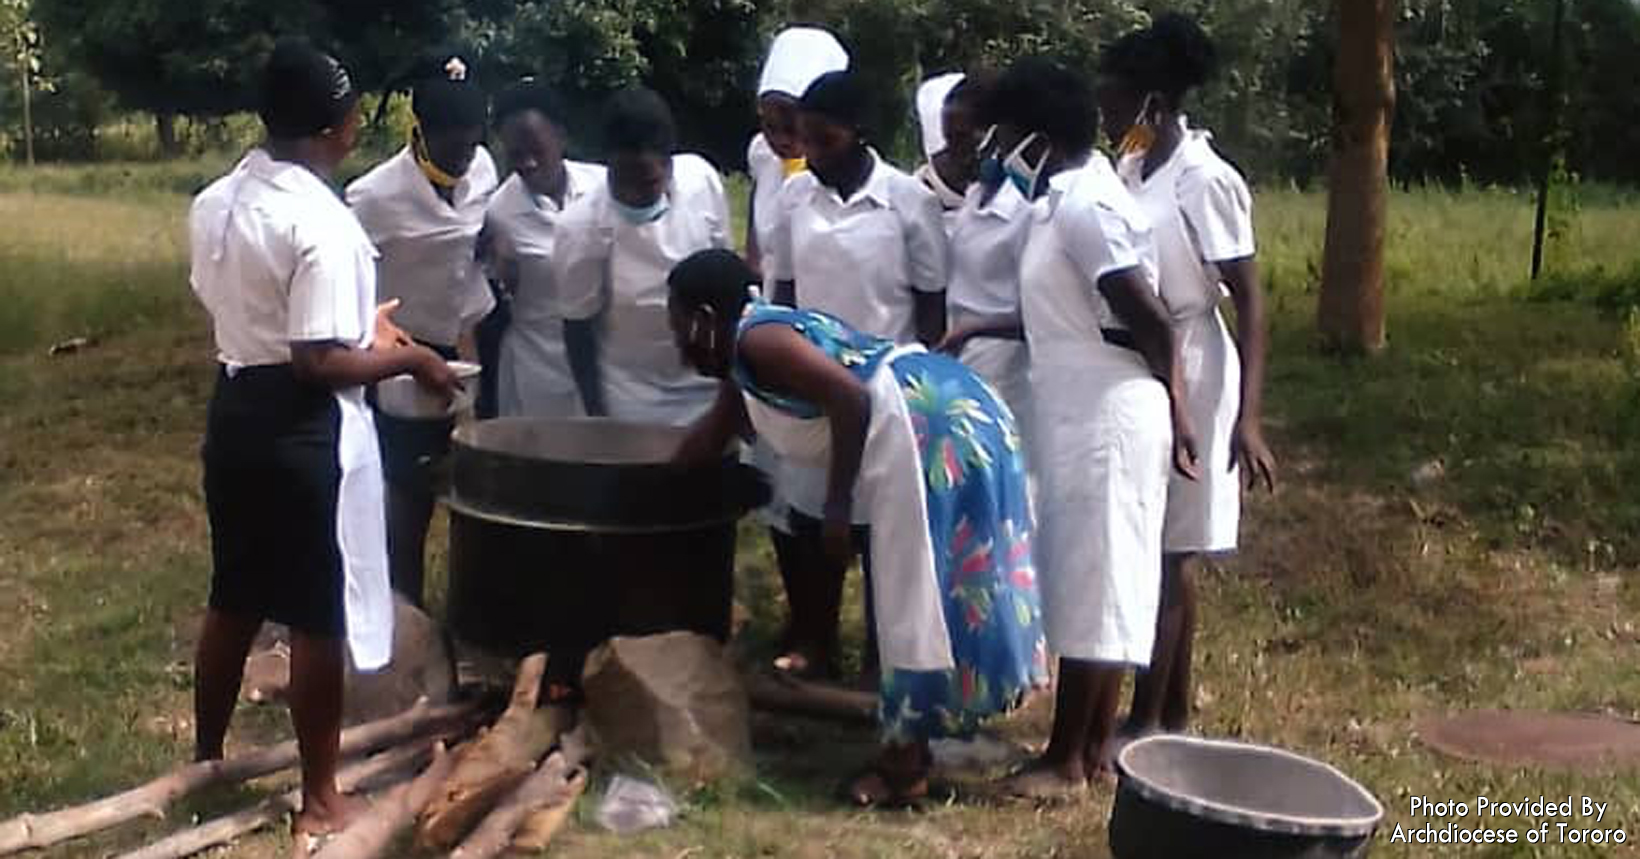 These cakes were baked using a saucepan with sand and firewood. Baking is a skill the girls are learning since they are learning how to cater.